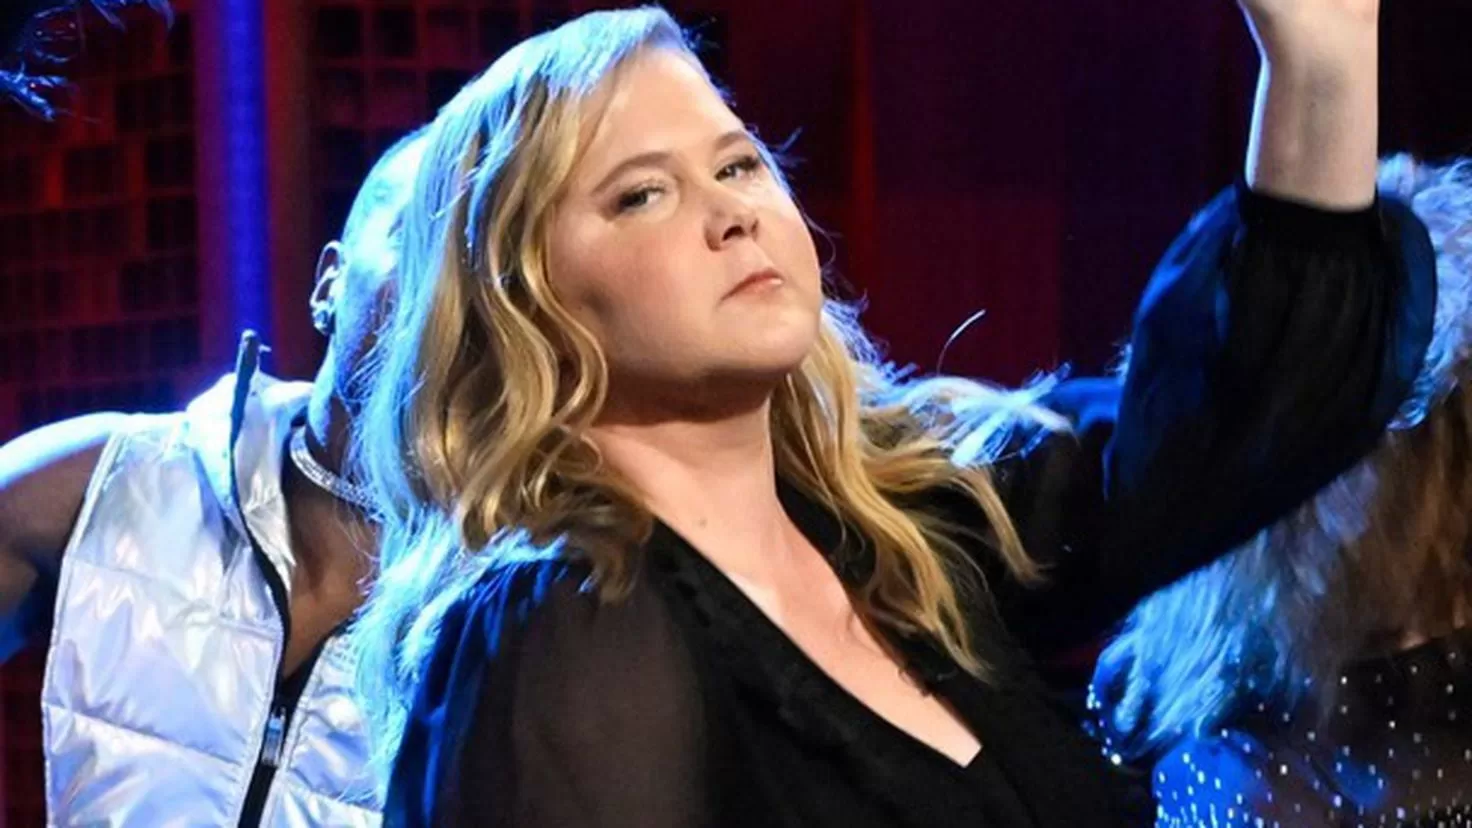 Amy Schumer responds to criticism of her swollen face and talks about her illness
